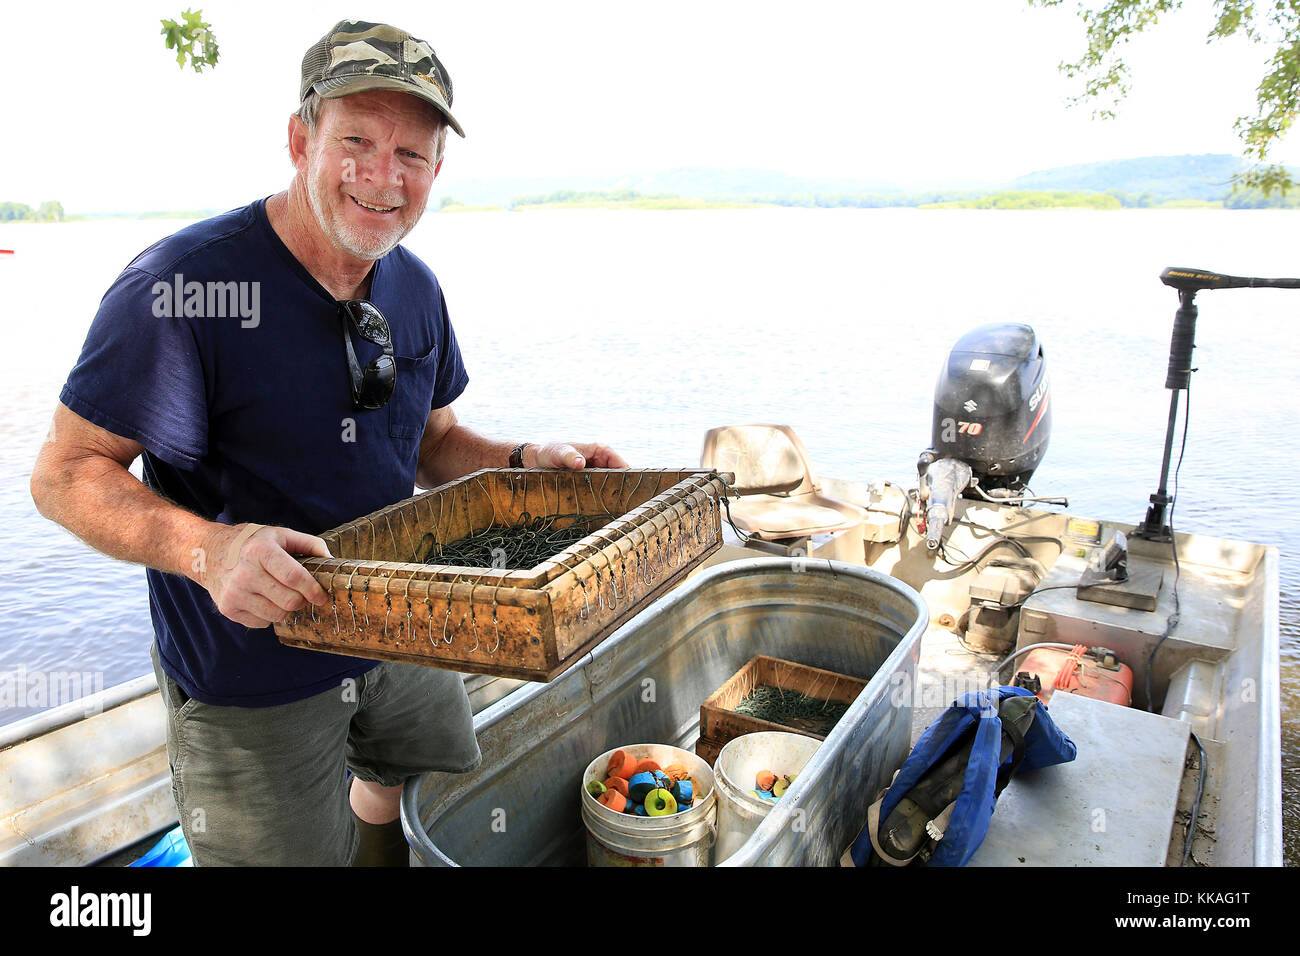 Bellevue, Iowa, USA. 6th July, 2017. Commercial fisherman Dennis Weiss of Bellevue loads a box containing one of his trotlines into his boat before heading out for the afternoon on the Mississippi River to set trotlines from the Spruce Creek Harbor near Bellevue, Iowa July 6, 2017. (A trotline is a length of line stretched with the use of a boat, across a section of water and fastened secure at both ends. On the line every three or four feet a hook is dangled from a drop line, essentially making it impossible for a catfish to swim by the line without being tempted by one of the baited hooks. Stock Photo